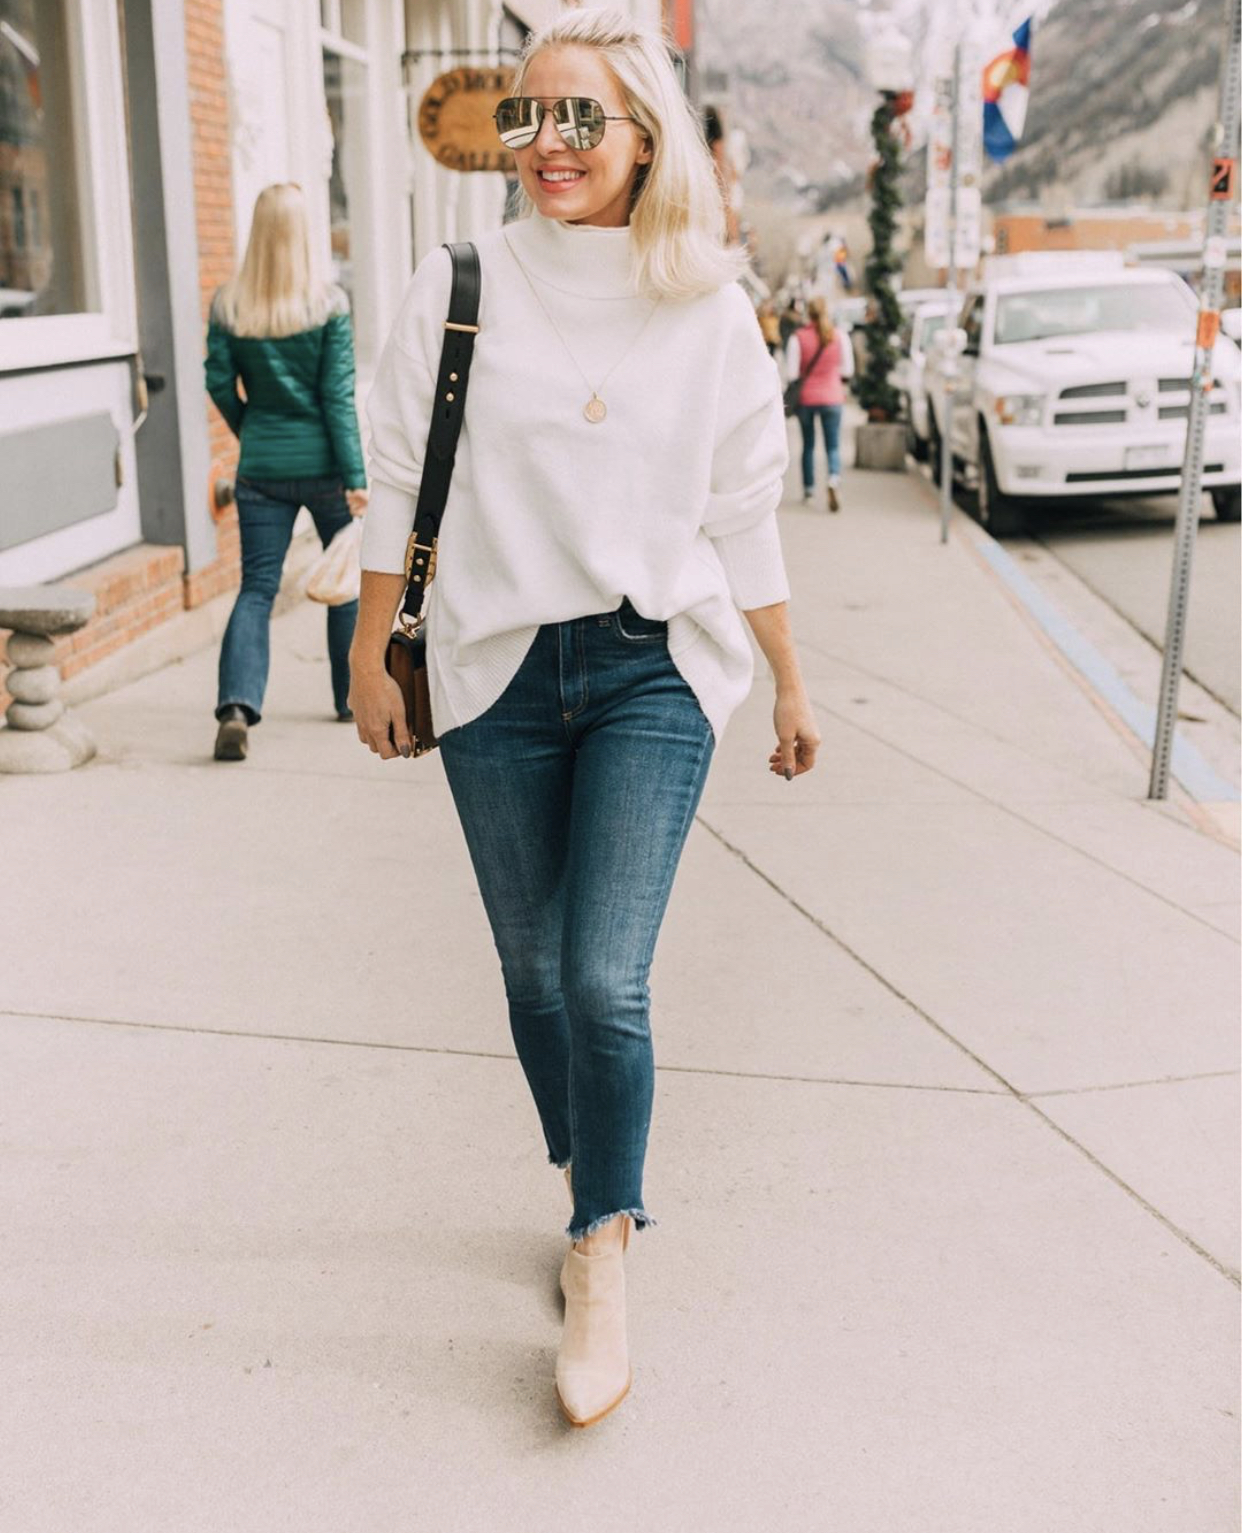 Monthly Favorites, Fashion blogger Erin Busbee of BusbeeStyle.com wearing a white turtleneck sweater with skinny jeans and Vince Camuto booties in Telluride, Colorado